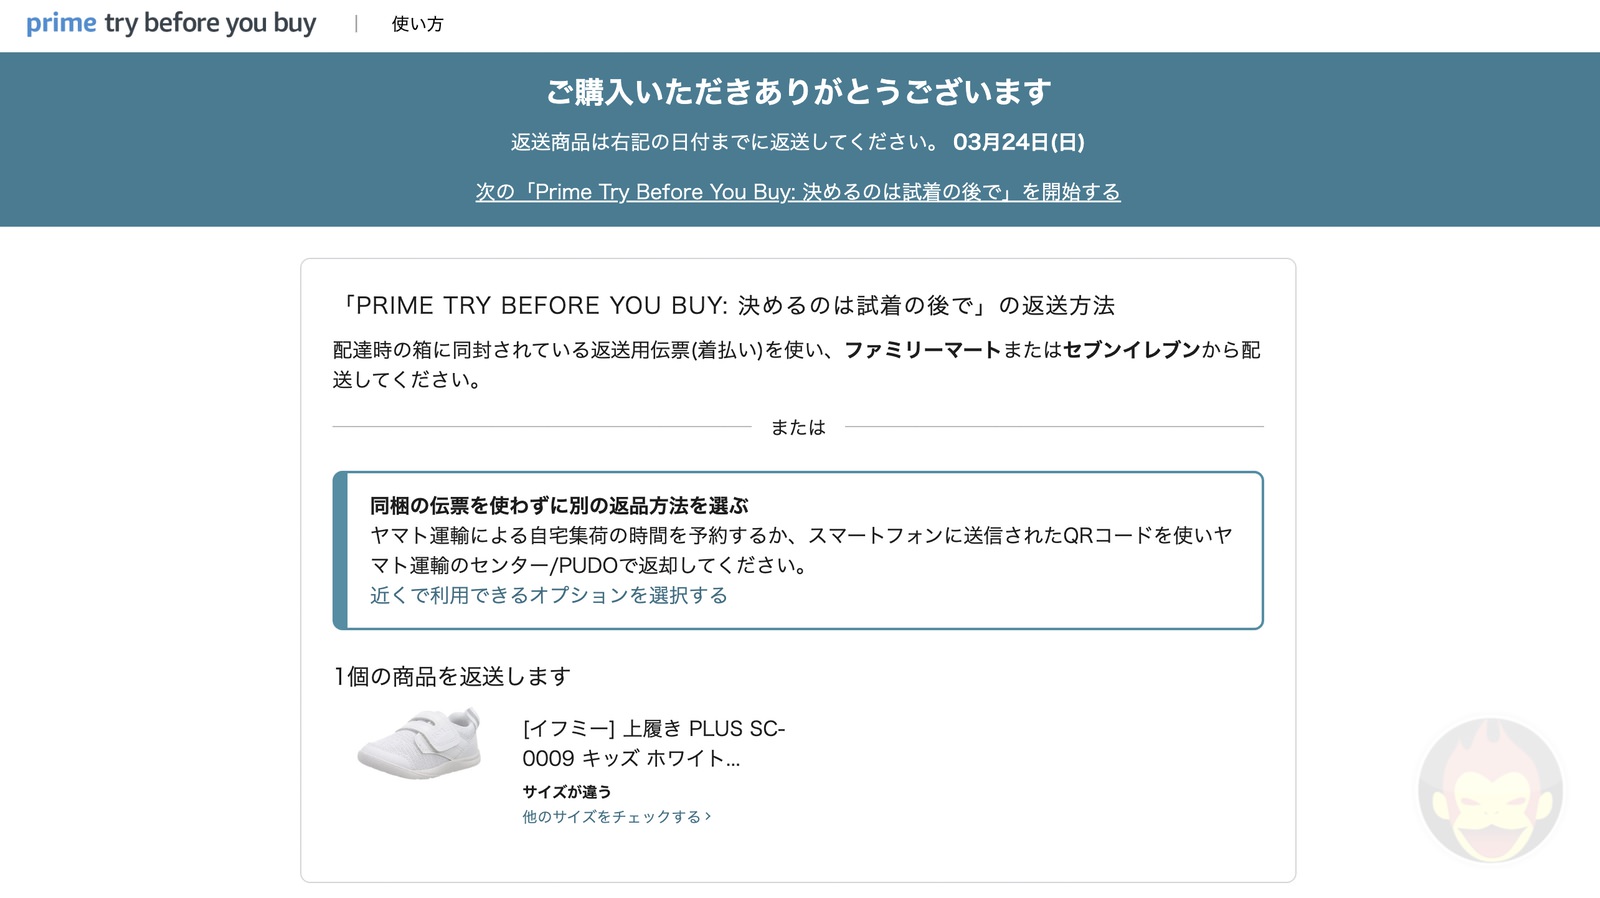 Amazon-Prime-Try-Before-You-Buy-21.jpg